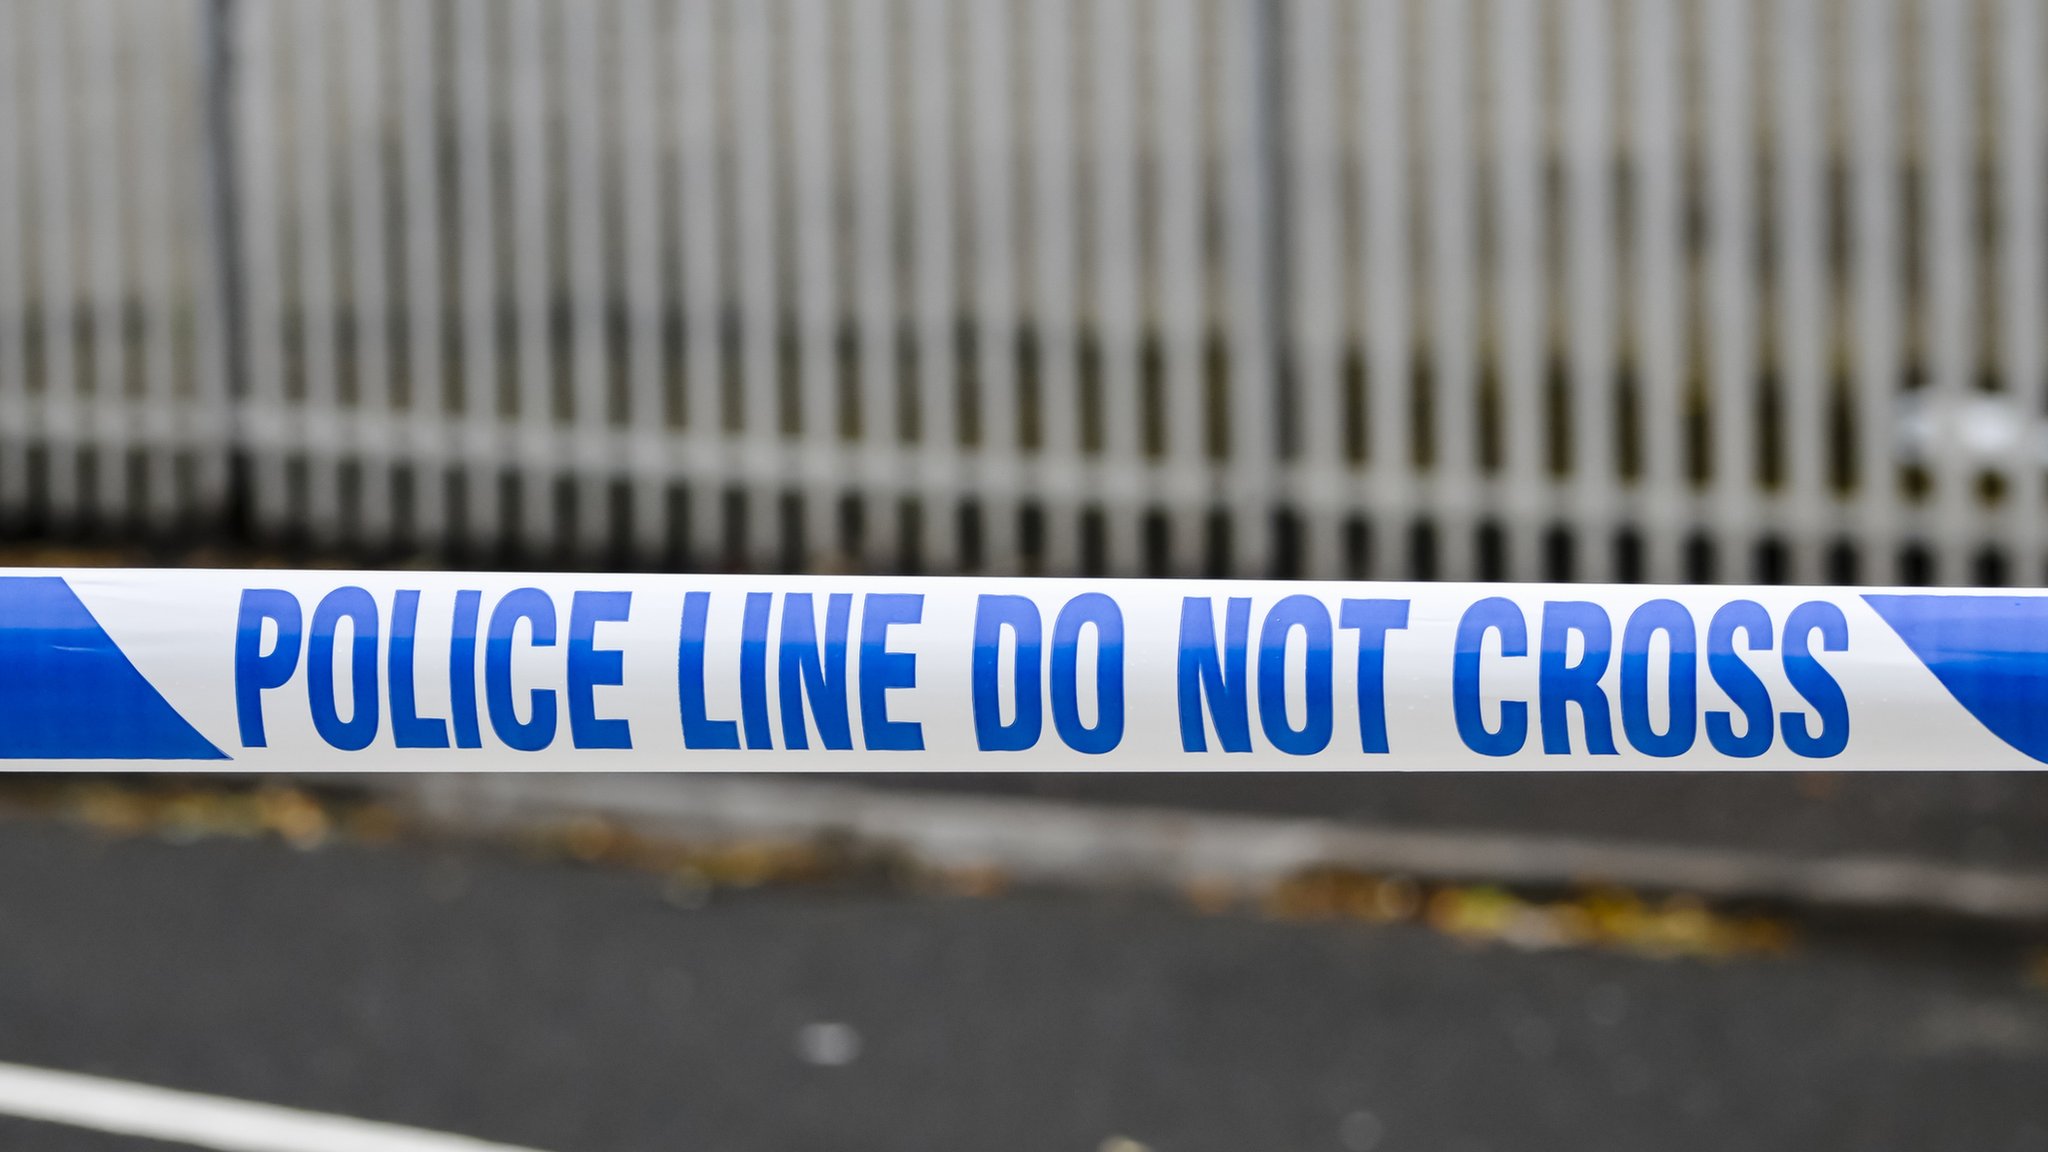 Bushmills: Man nailed to fence in sinister attack